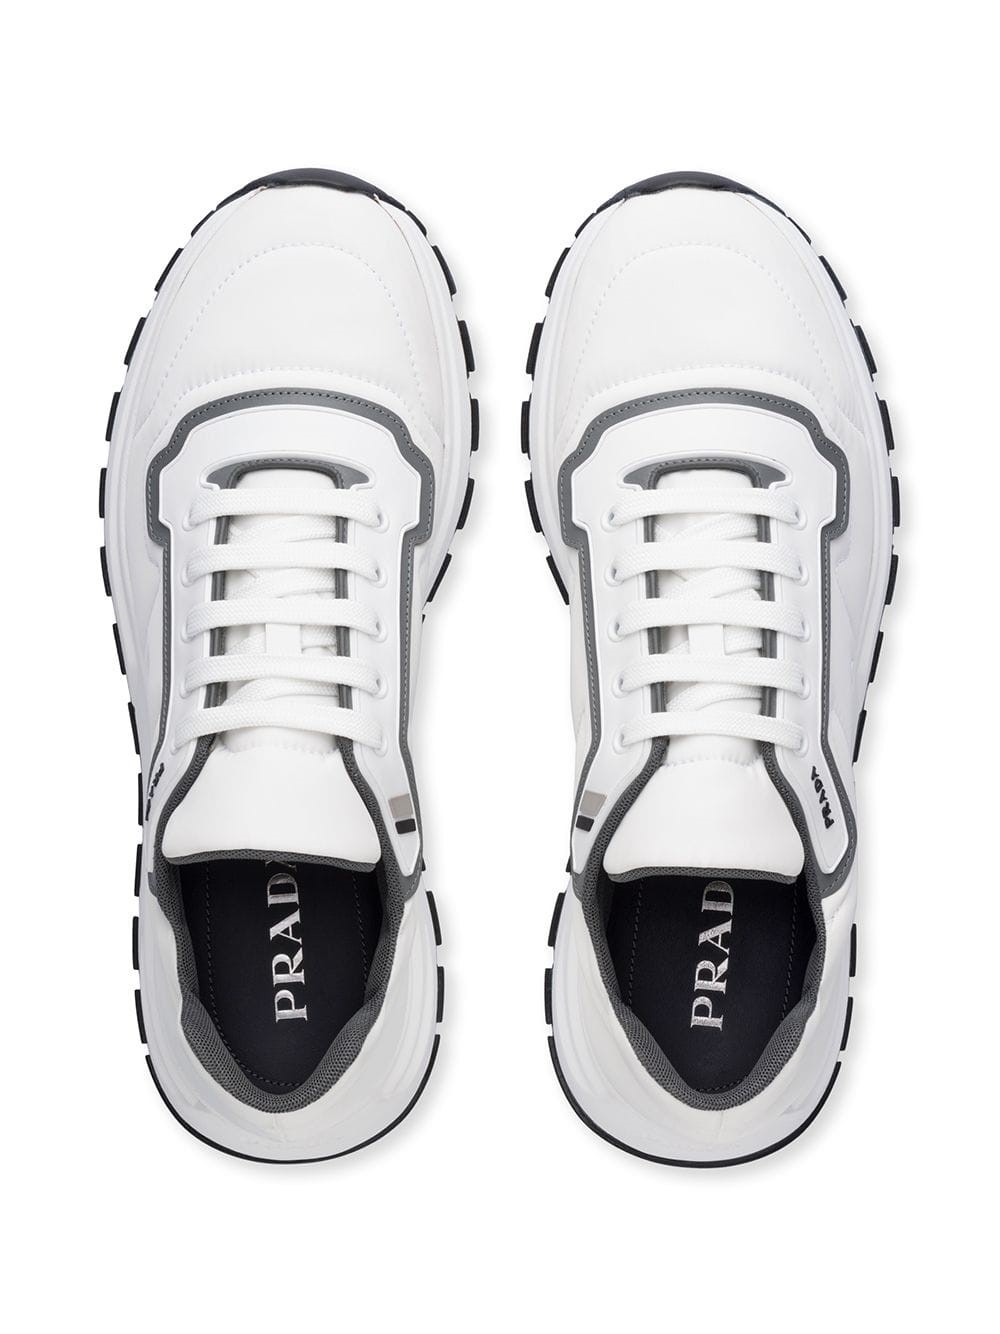 prada PRAX 01 SNEAKERS available on montiboutique.com - 26989